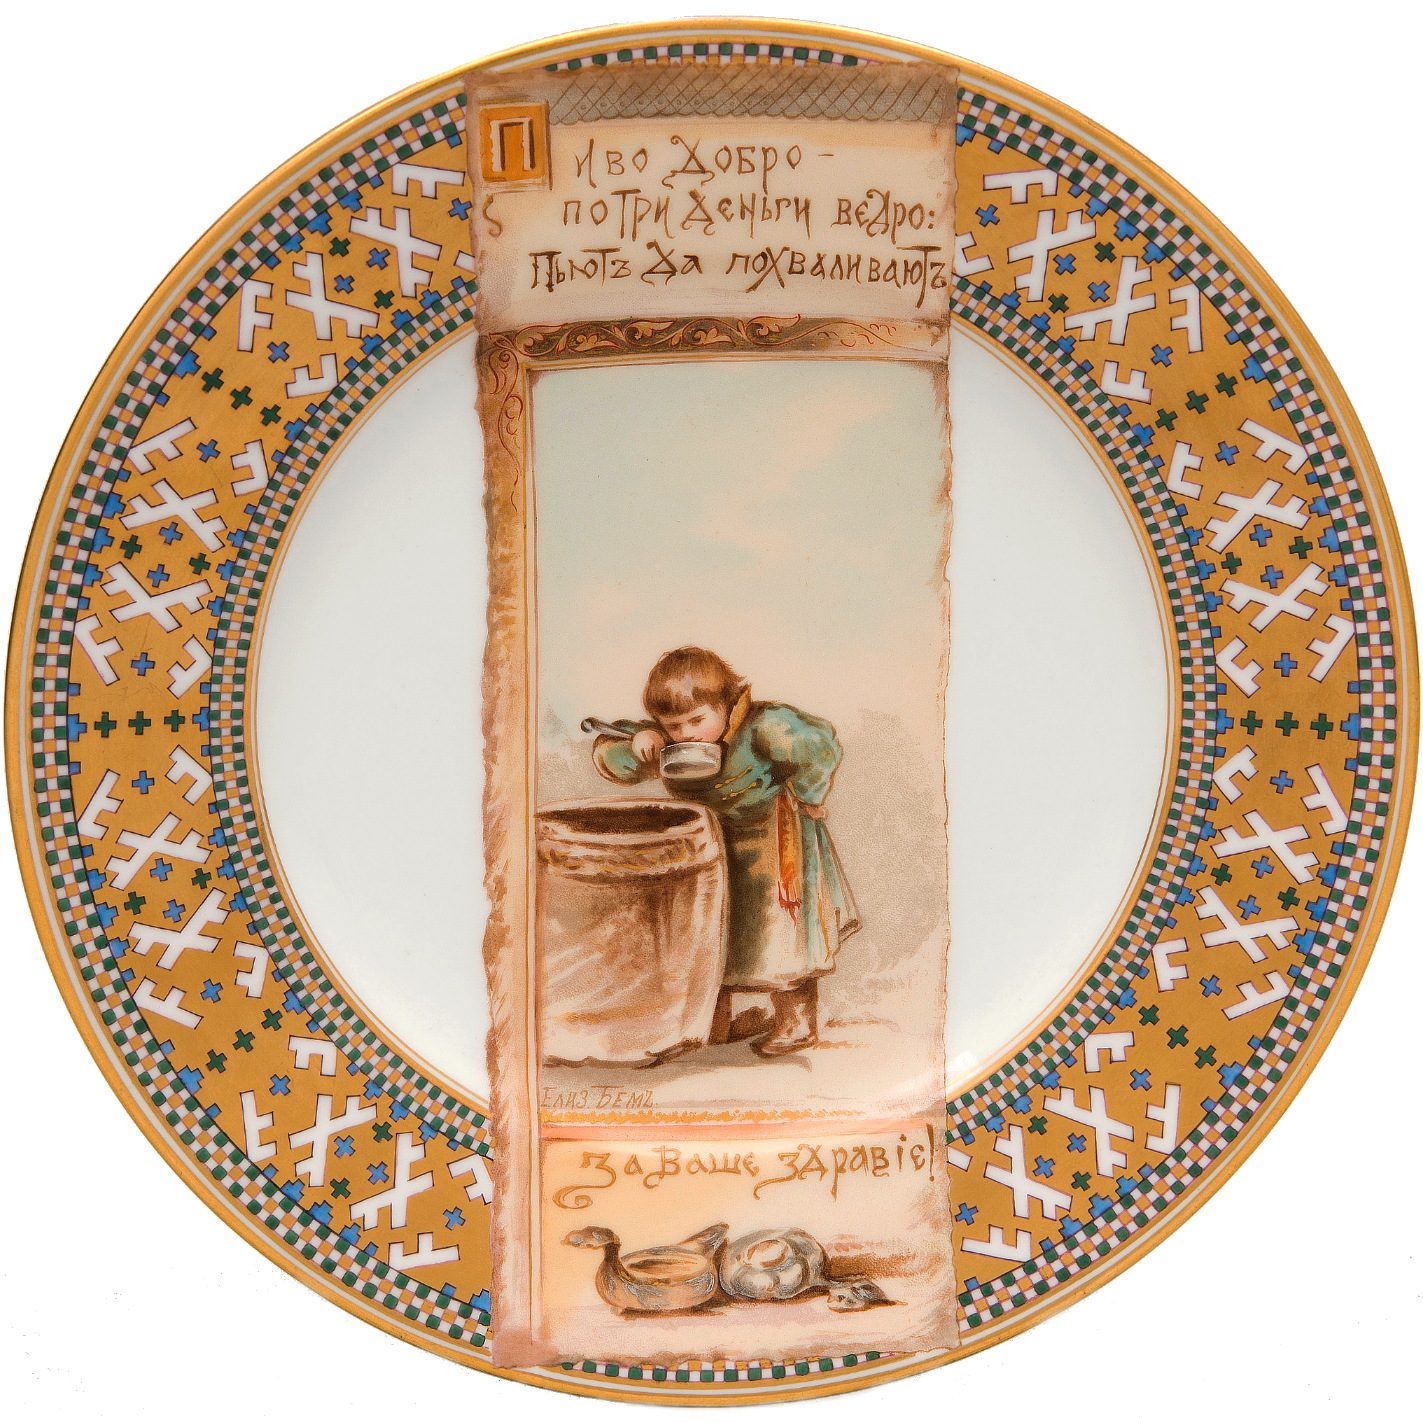 Kornilov plate "Beer" after Elizaveta Bem. Depicts a boy in traditional Russian attire drinking beer from a kovsh.